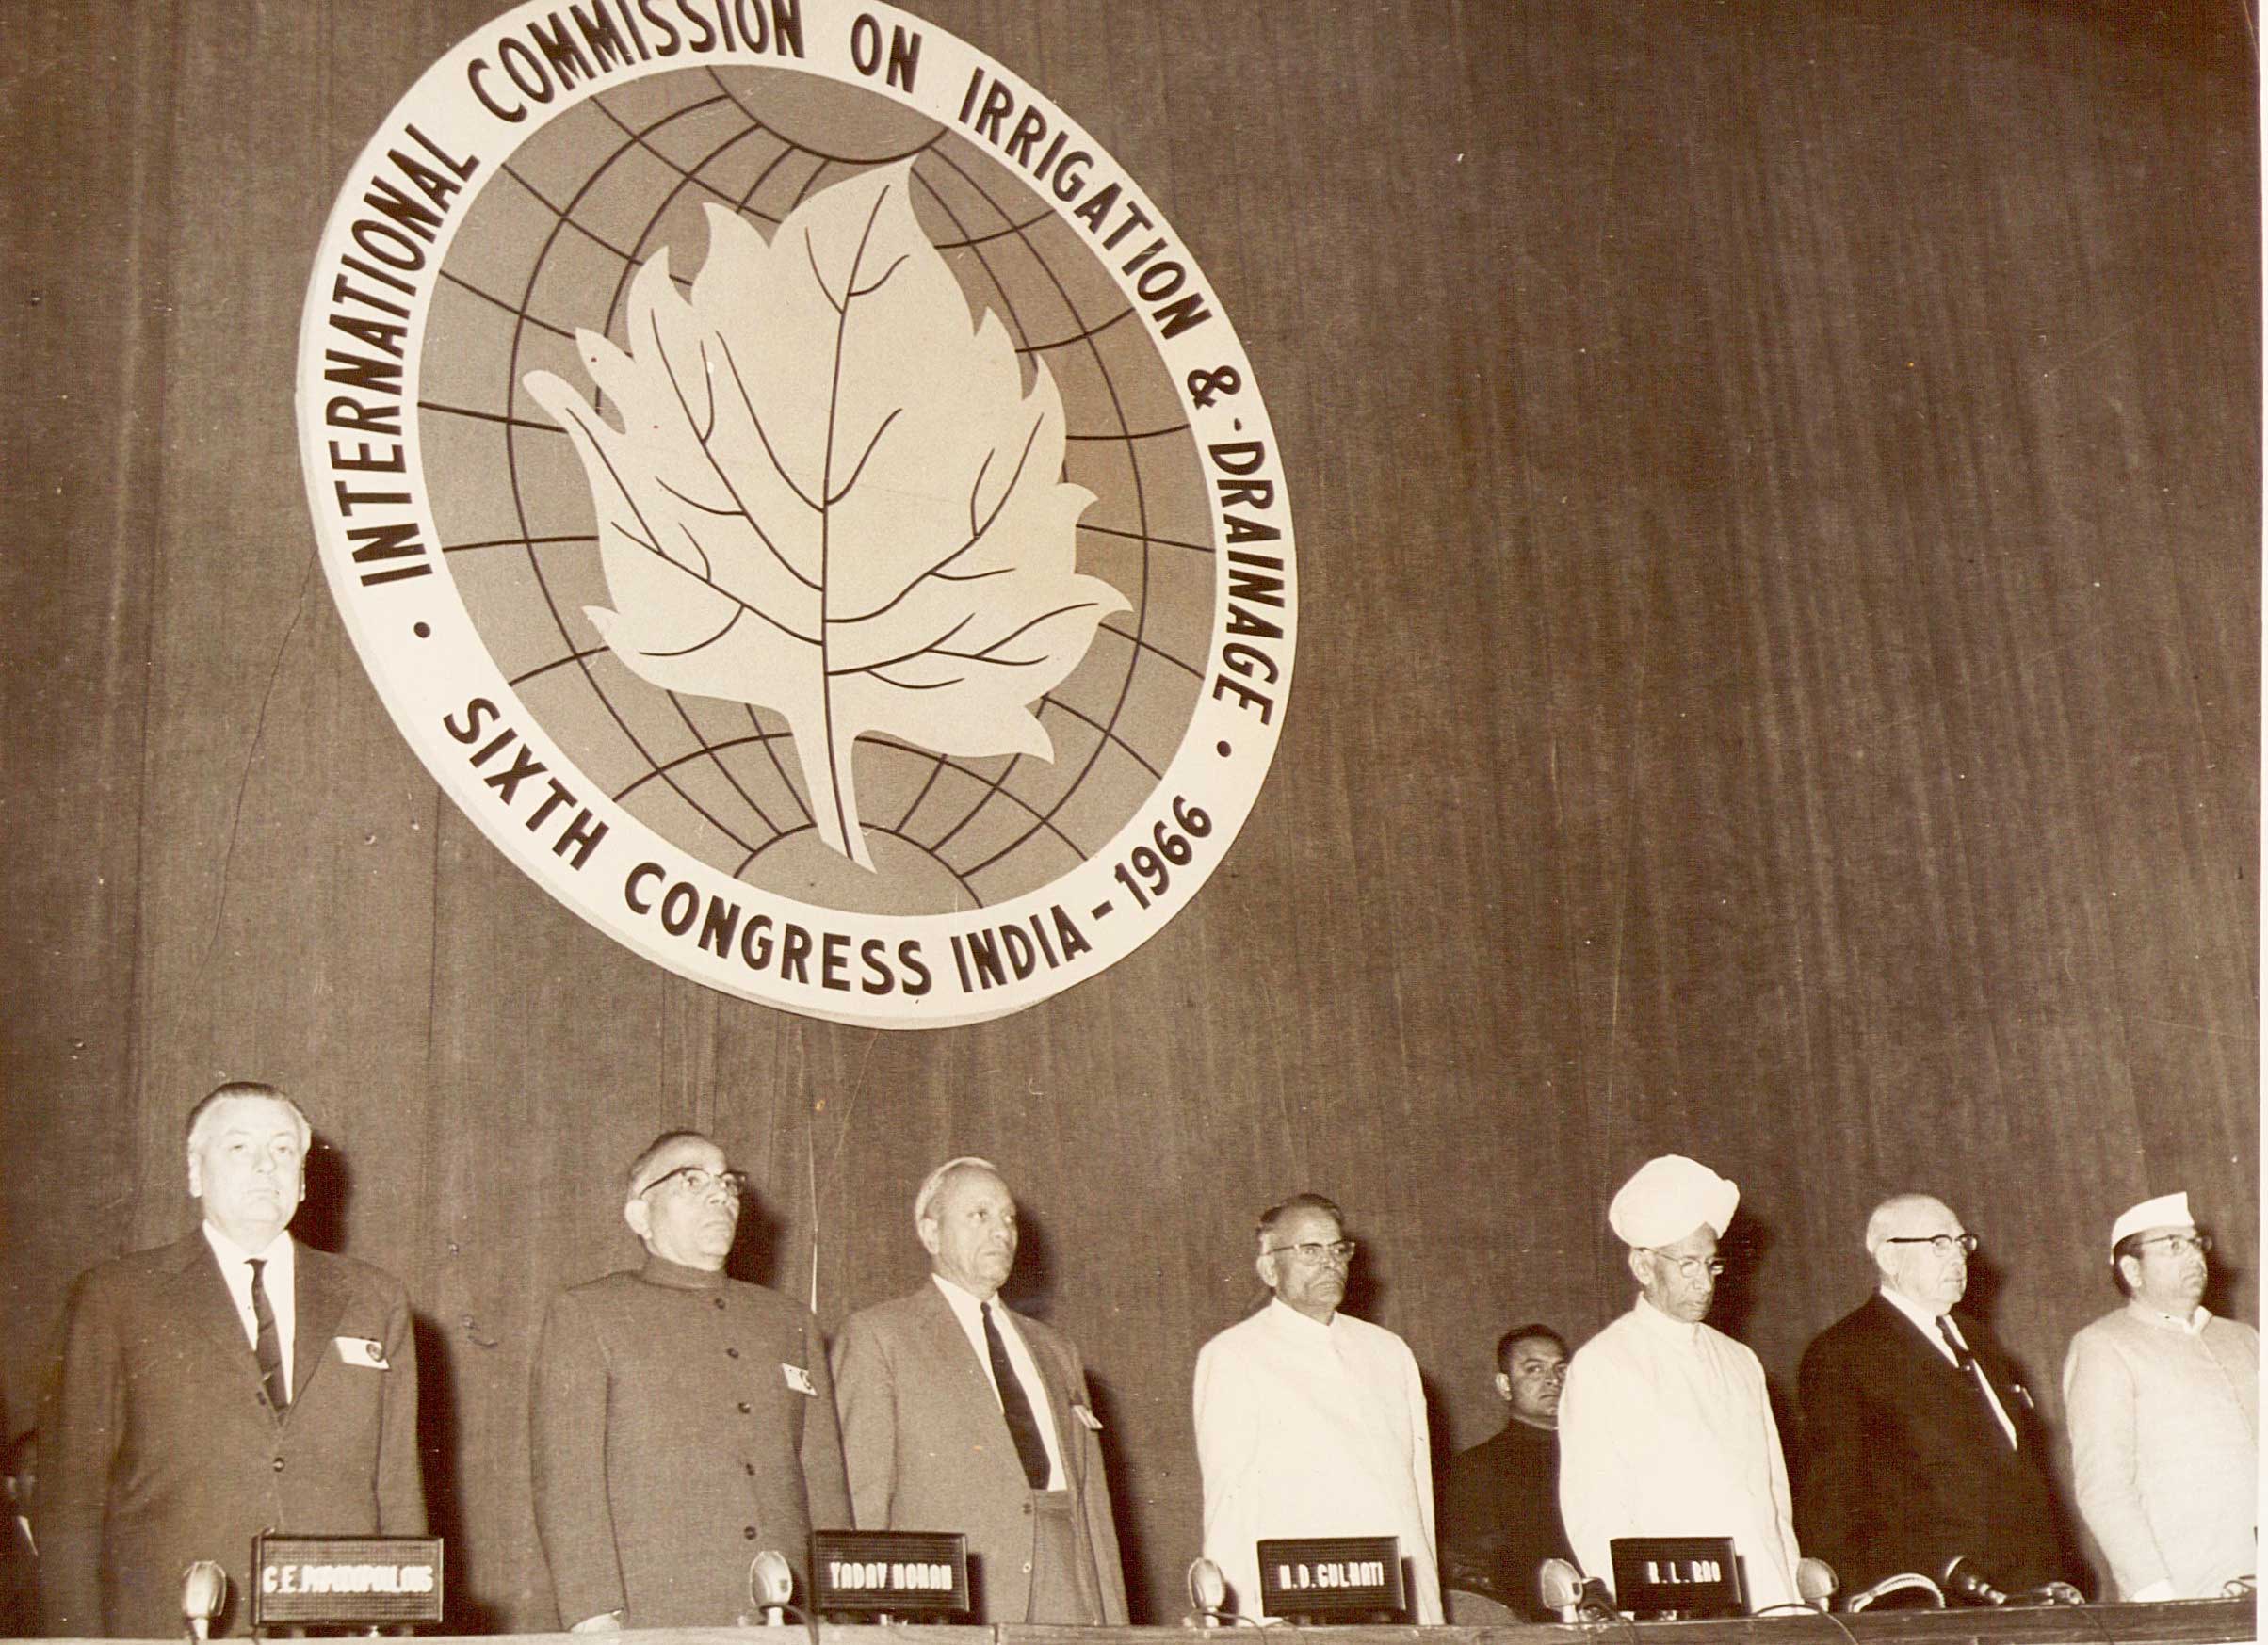 17th IEC Meeting & 6th ICID Congress on Irrigation and Drainage, New Delhi, 1966